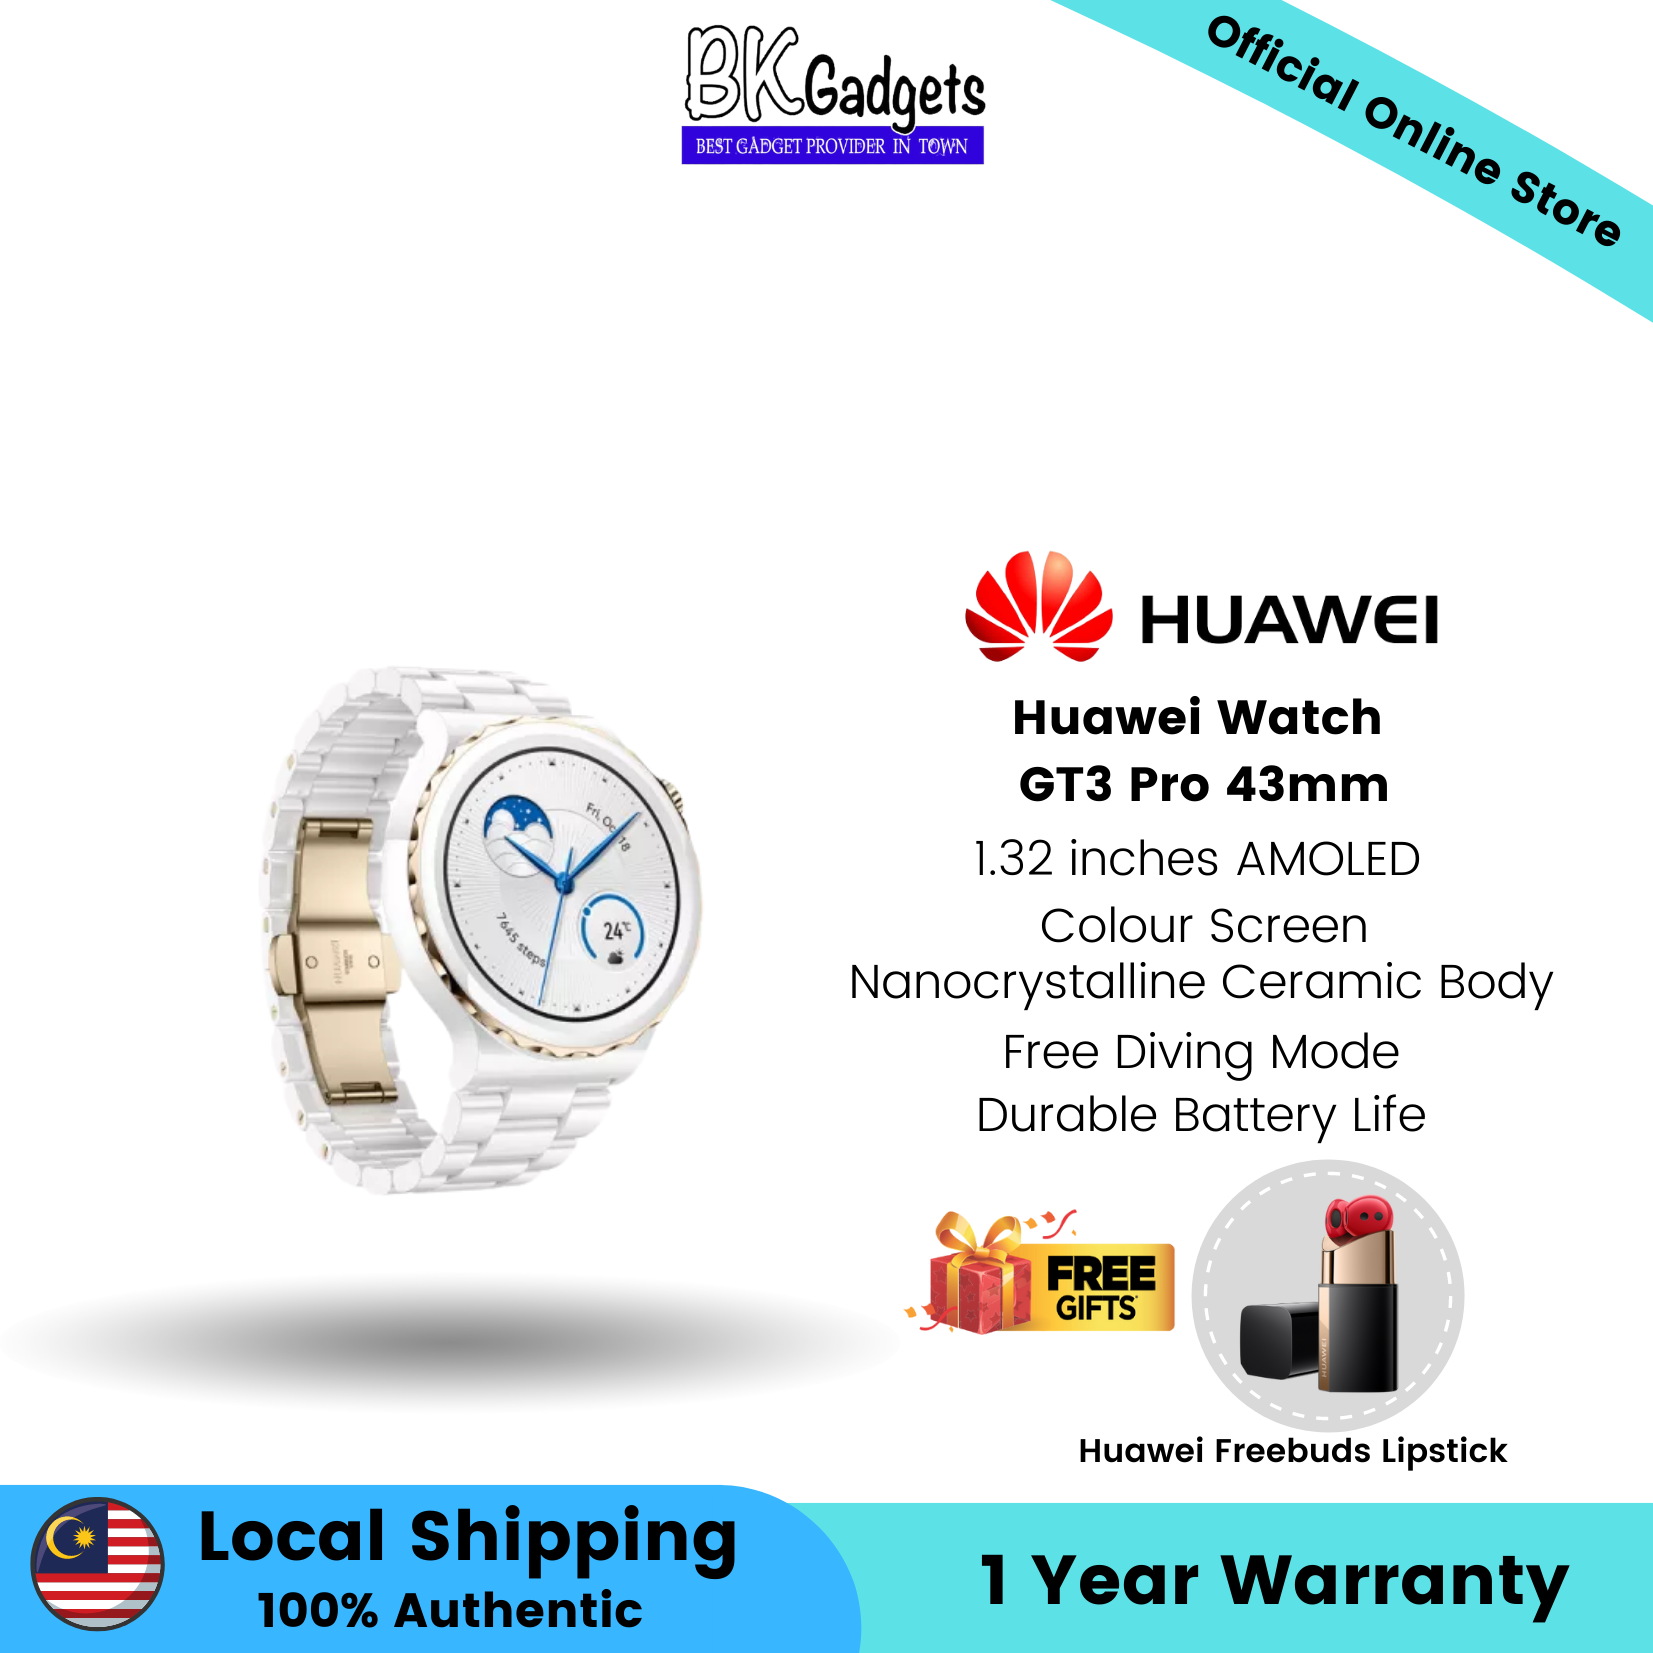 Huawei Watch GT 3 Pro 43mm - 1.32 inches AMOLED Color Screen Nanocrystalline Ceramic Body Free Diving Mode